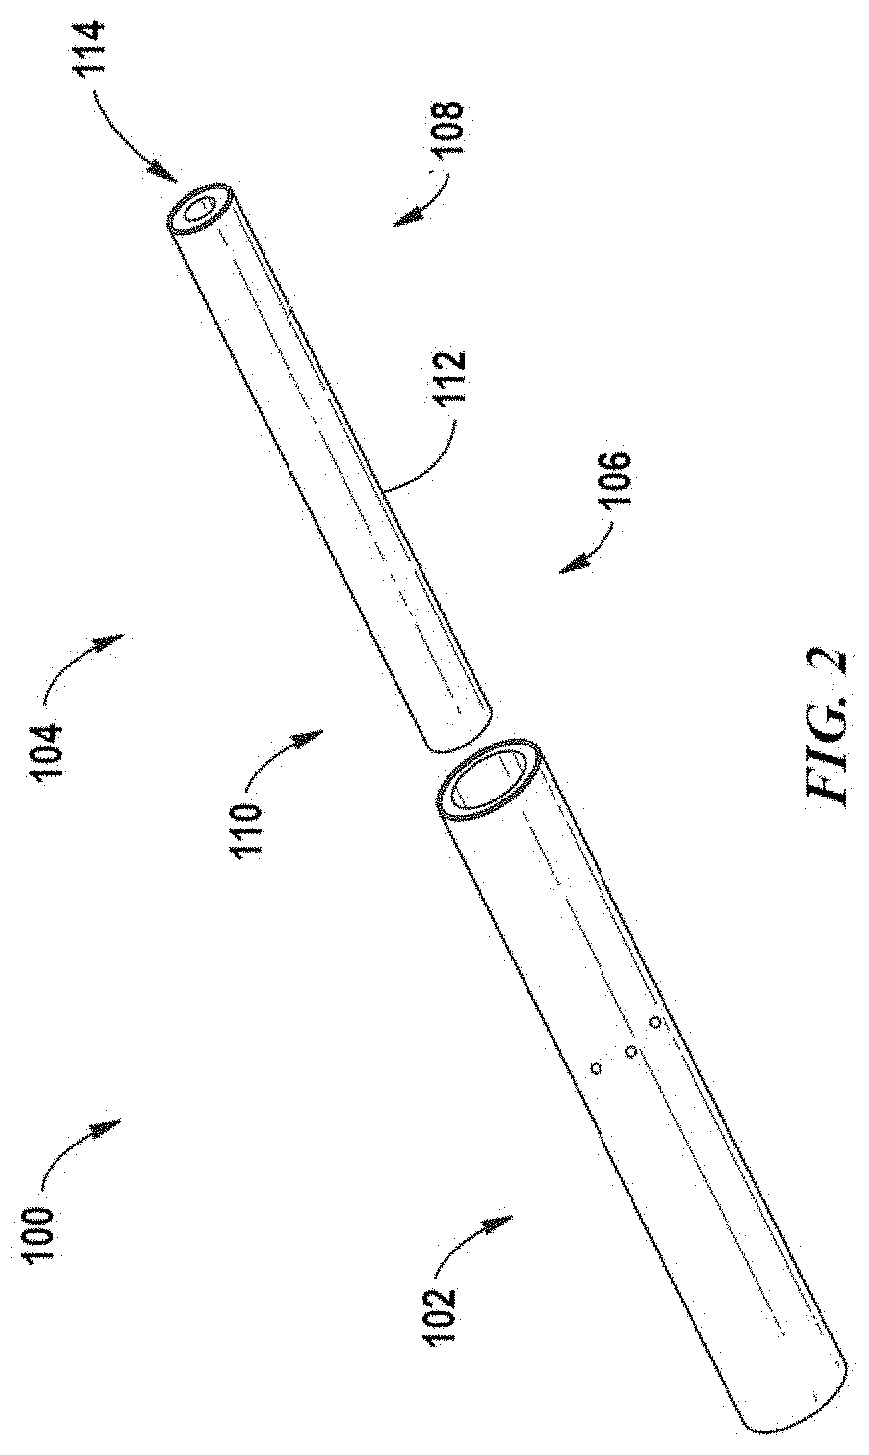 Methods of making tobacco-free substrates for aerosol delivery devices